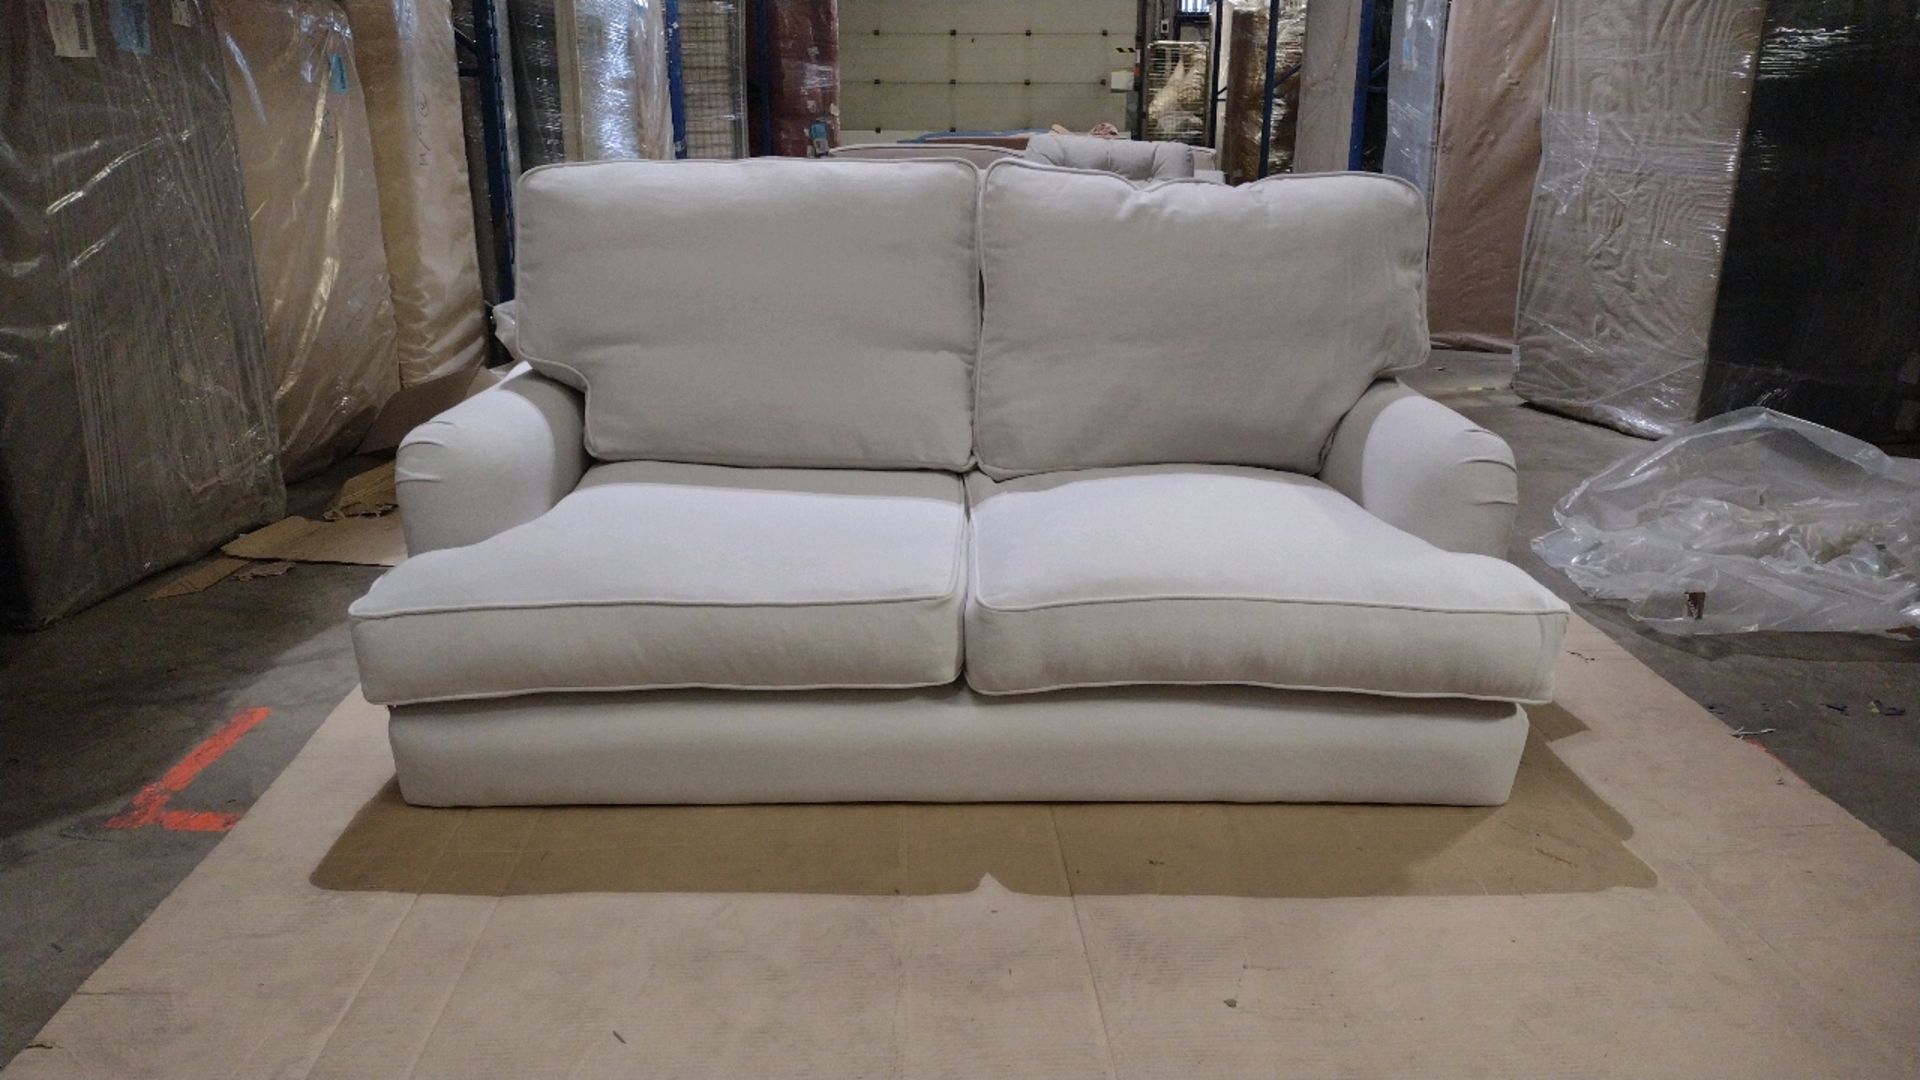 Bluebell 2 Seat Sofa - Image 2 of 6